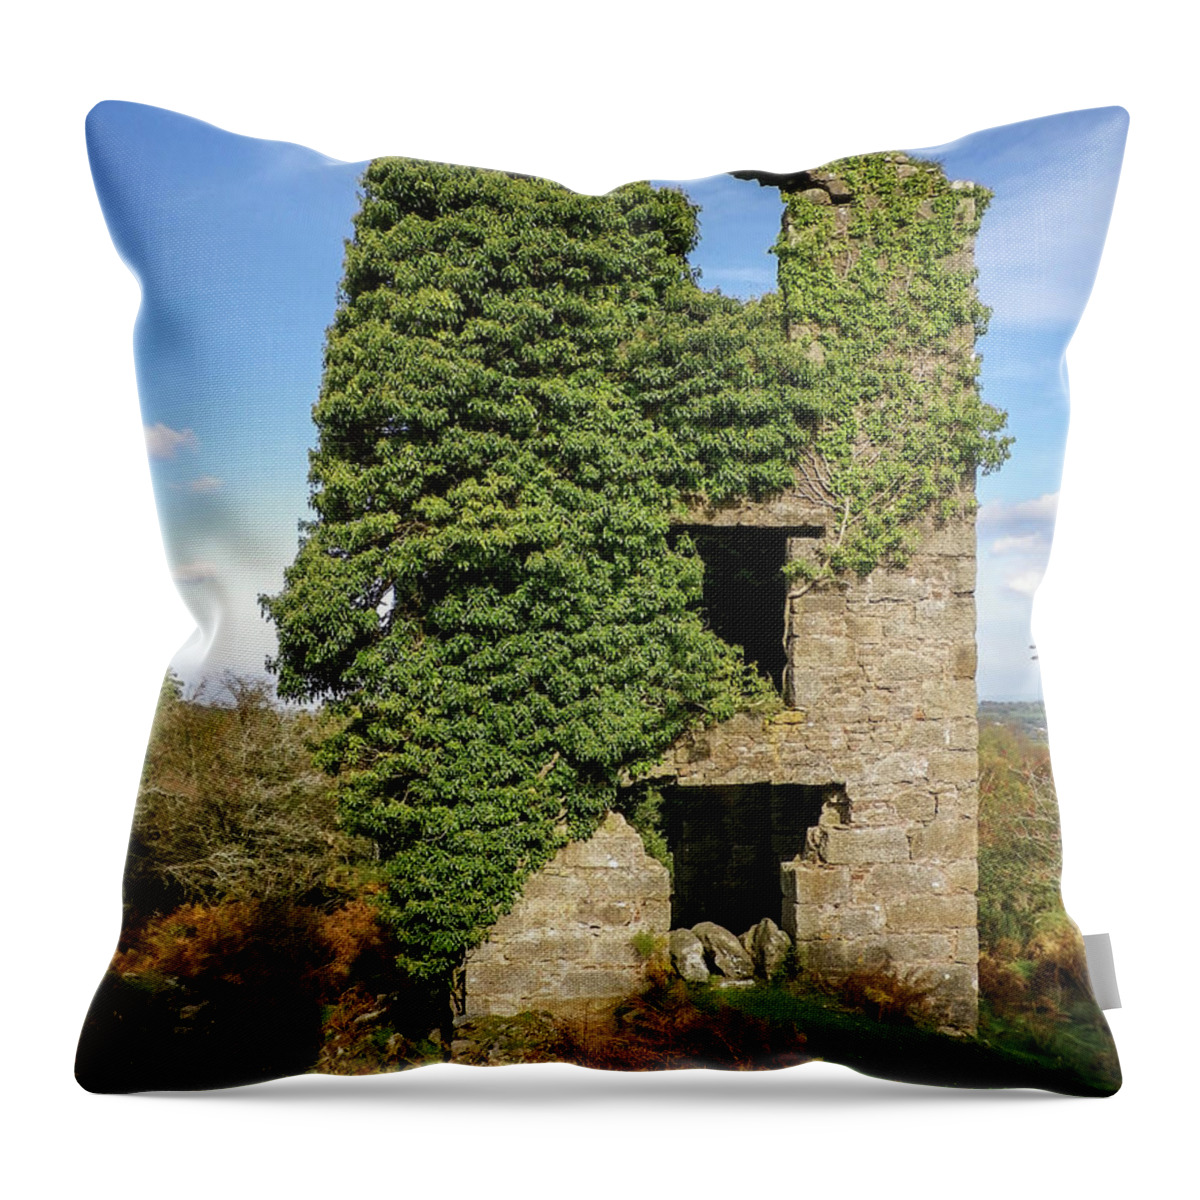 Marke Valley Throw Pillow featuring the photograph Whim Winding Engine House Marke Valley Bodmin Moor Cornwall by Richard Brookes